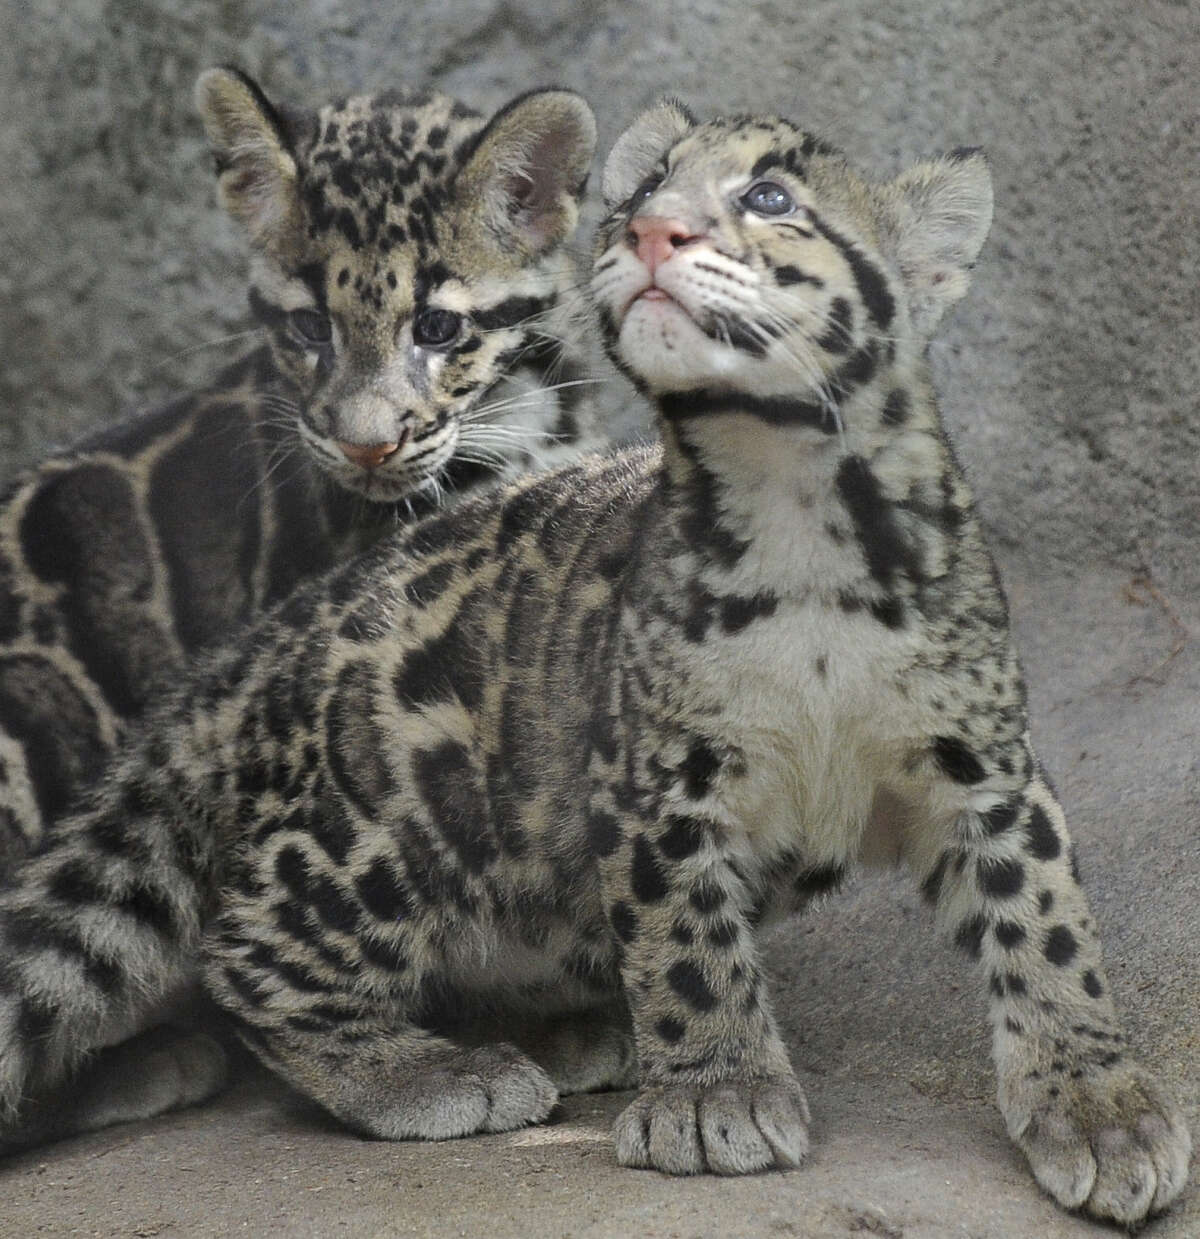 Senja (left) and Koshi explore their new habitat during their debut at the Houston Zoo. The brothers were born at the zoo June 6. Some of the increased revenue they help generate in ticket sales go toward conservation efforts, but some say that doesn't justify keeping animals in captivity.